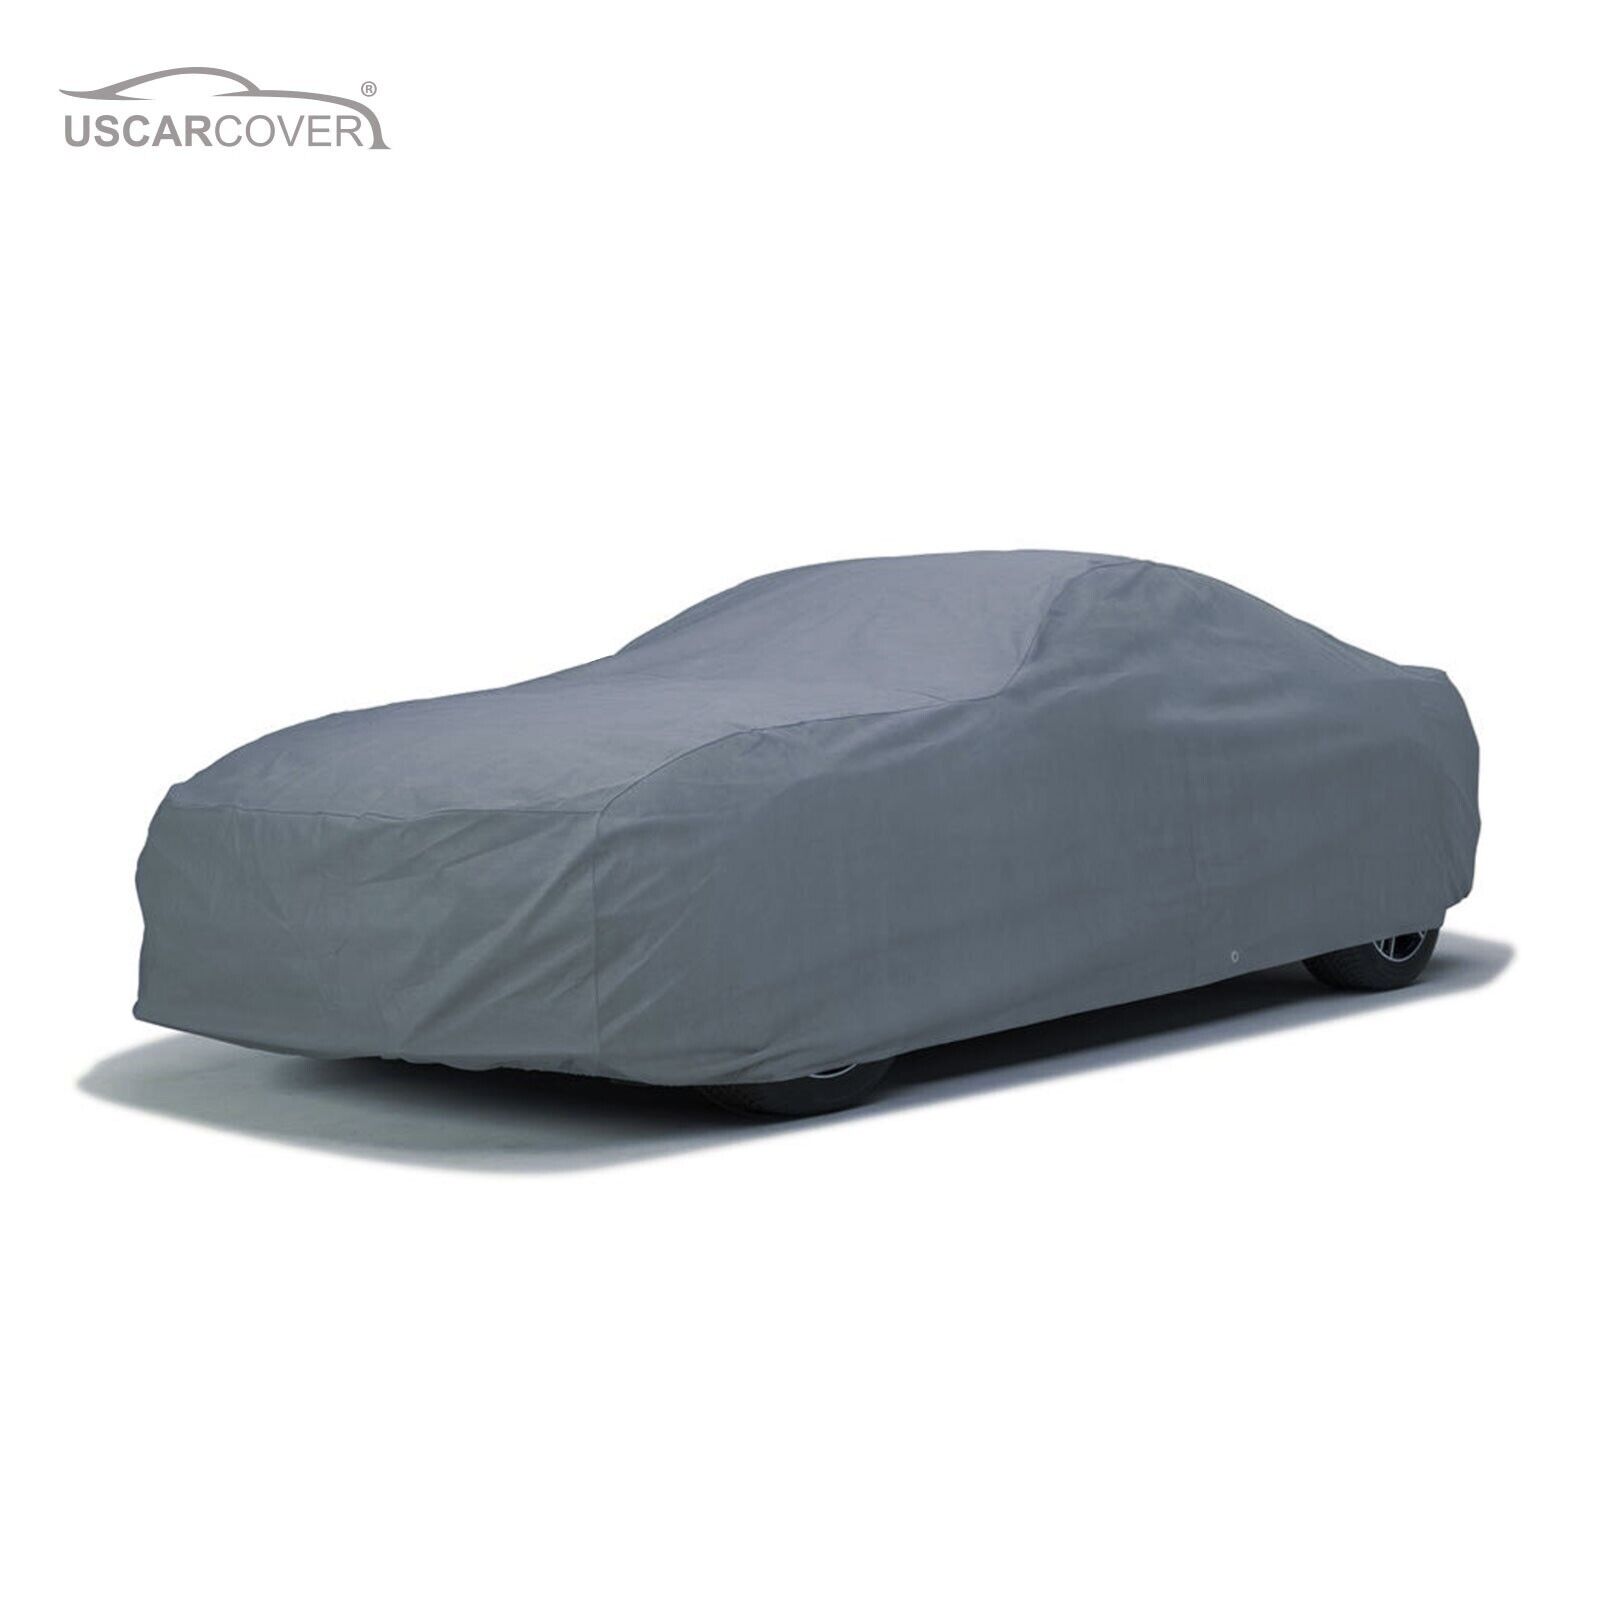 DaShield Ultimum Series Waterproof Car Cover for Ford Fairlane 1966 1967 Coupe